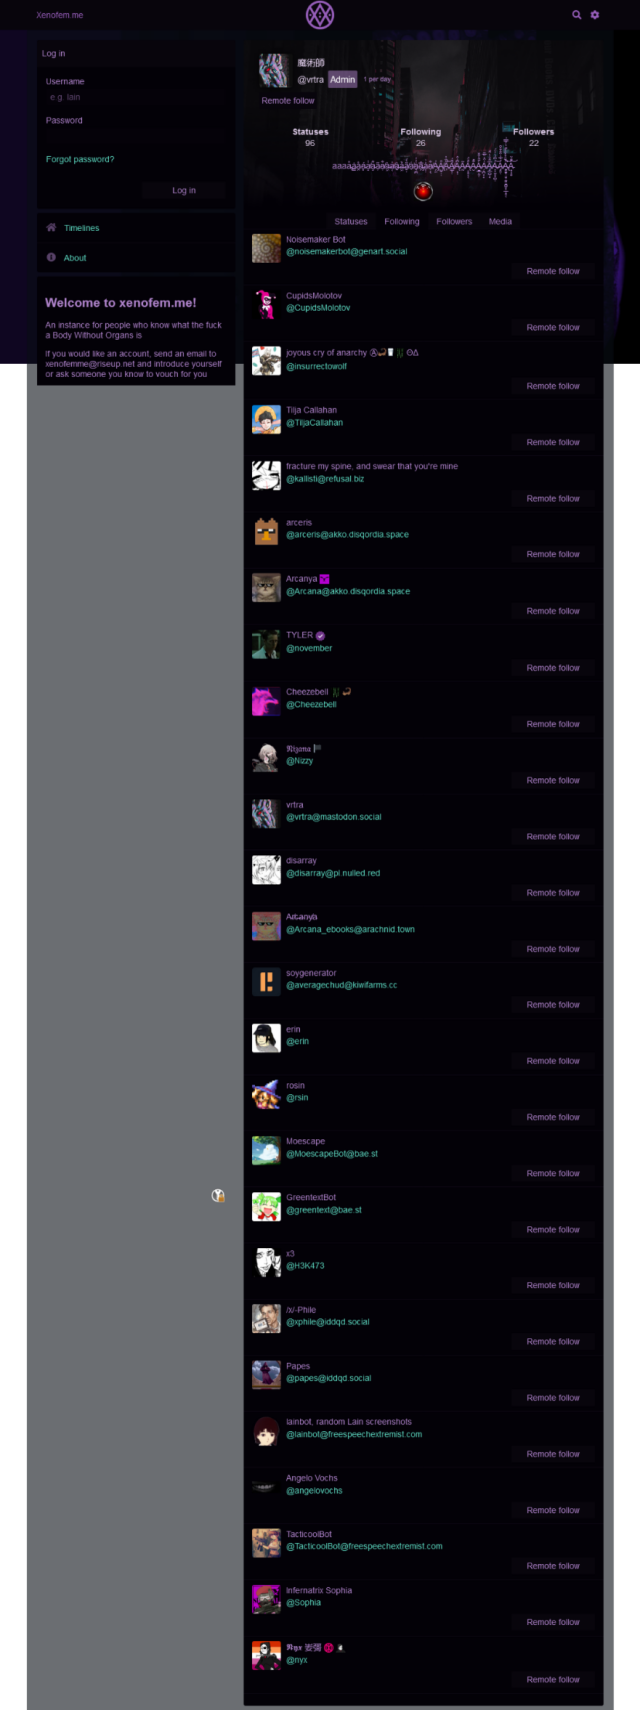 A long list of follows from @vrtra, a xenofem.me admin. Notable inclusions:
- @averagechud@kiwifarms.cc
- @MoescapeBot@bae.st
- @greentext@bae.st
- @xphile@iddqd.social
- @papes@iddqd.social
- @lainbot@freespeechextremist.com
- @TacticoolBot@freespeechextremist.com